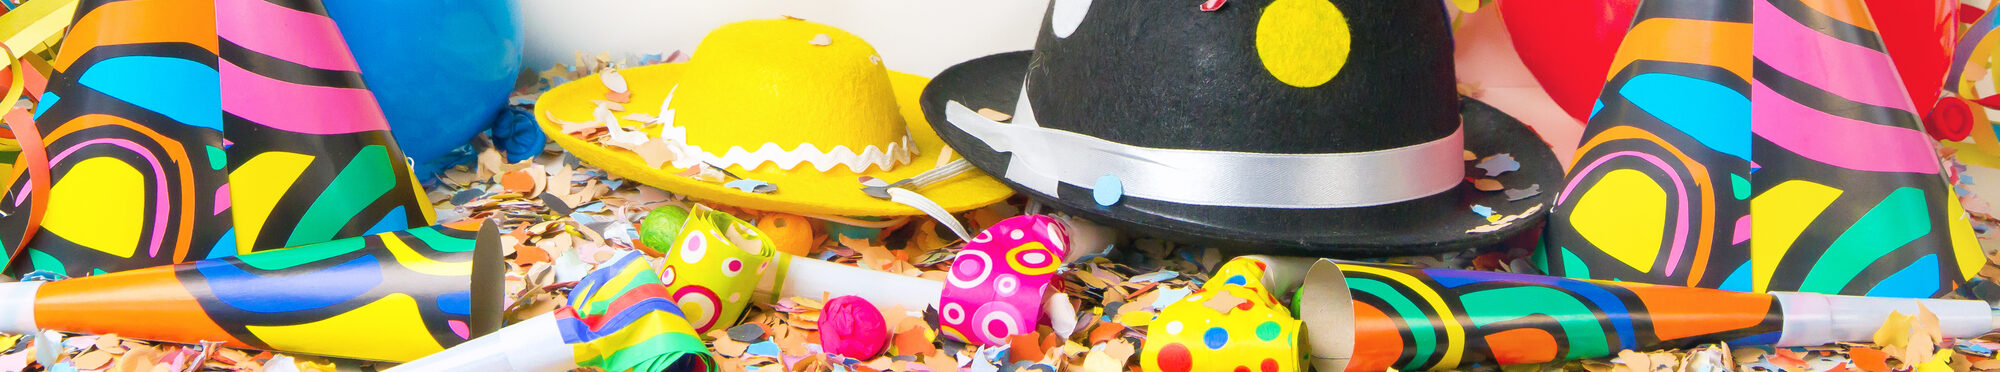 Party,Background,With,Hats,And,Balloons